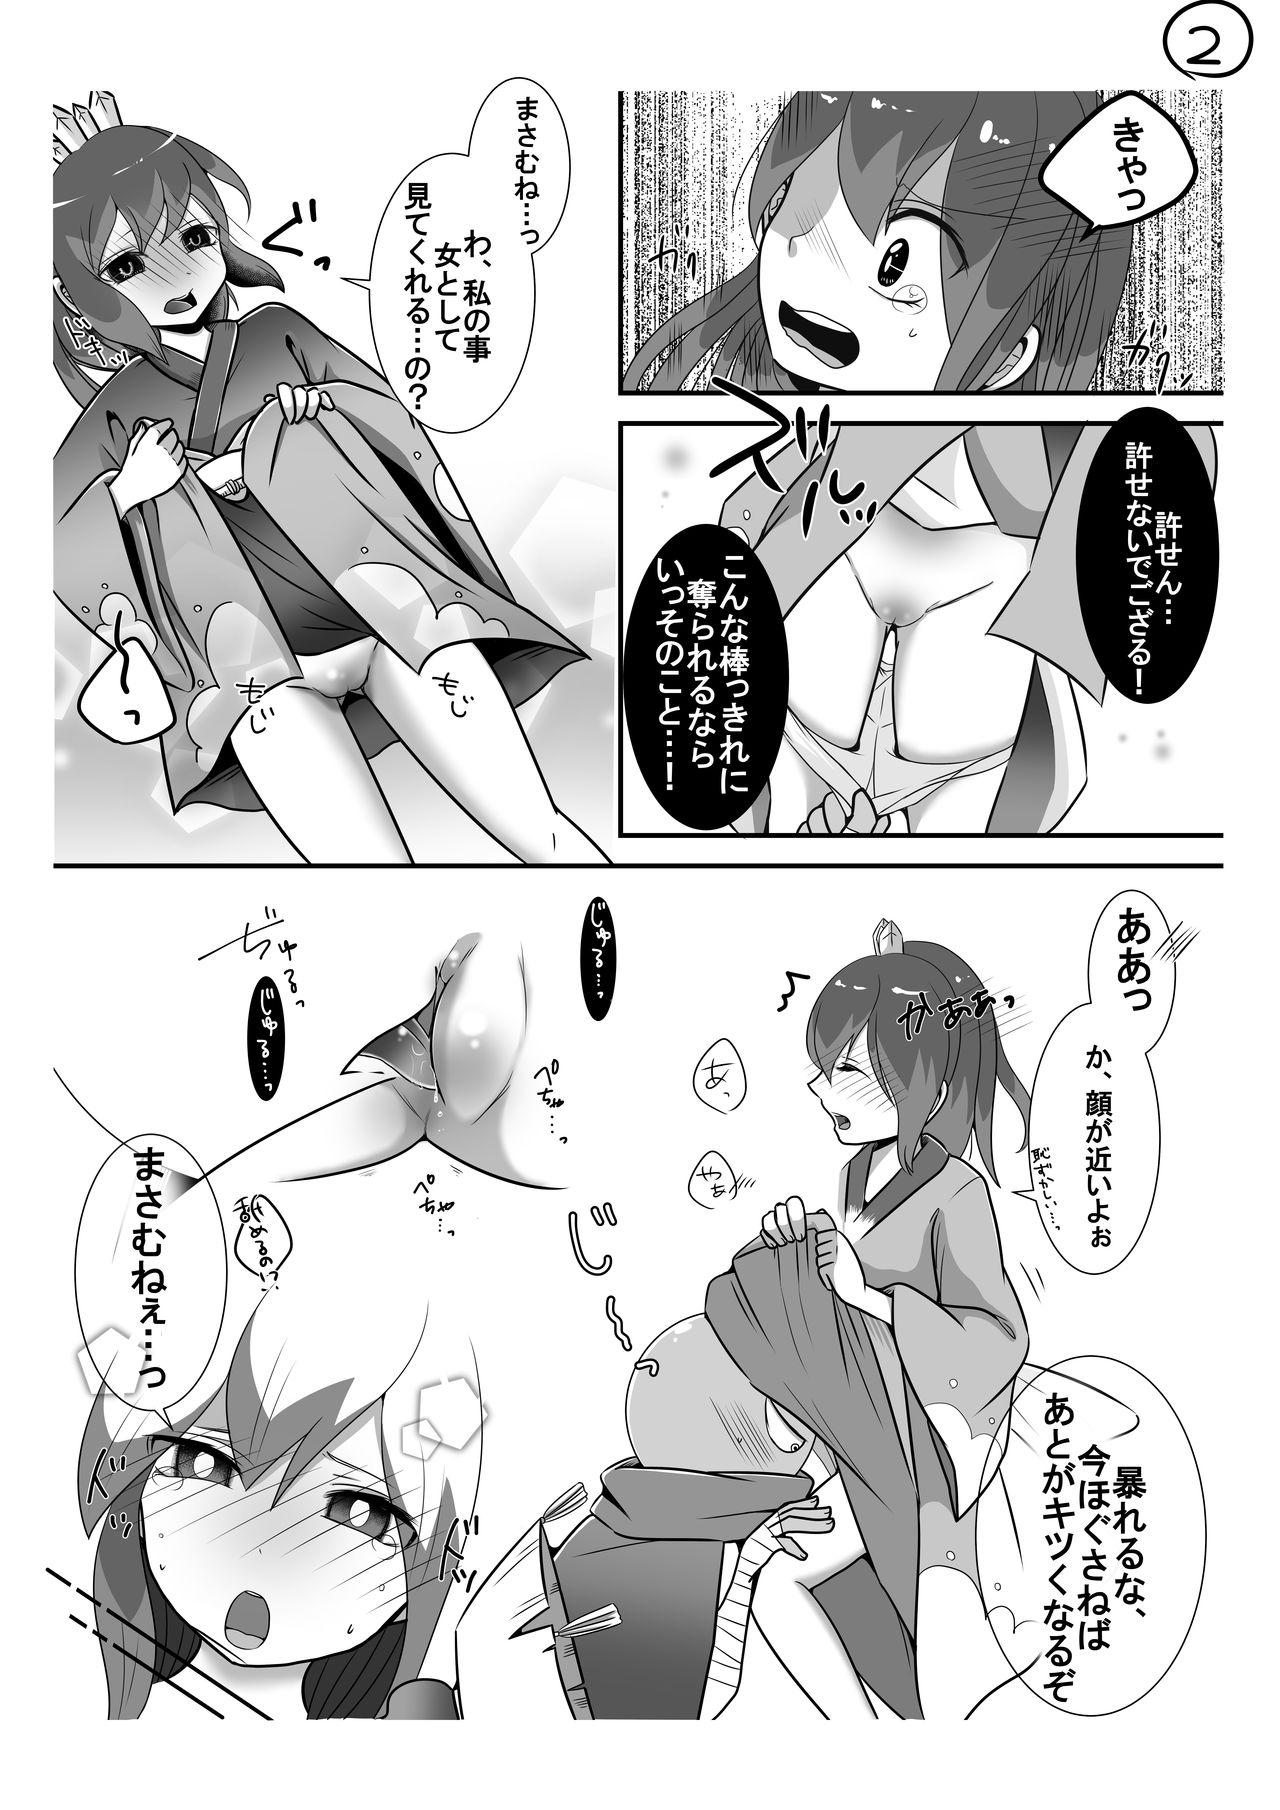 Stepfamily お題「まさふぶ」 - Youkai watch Body - Page 2